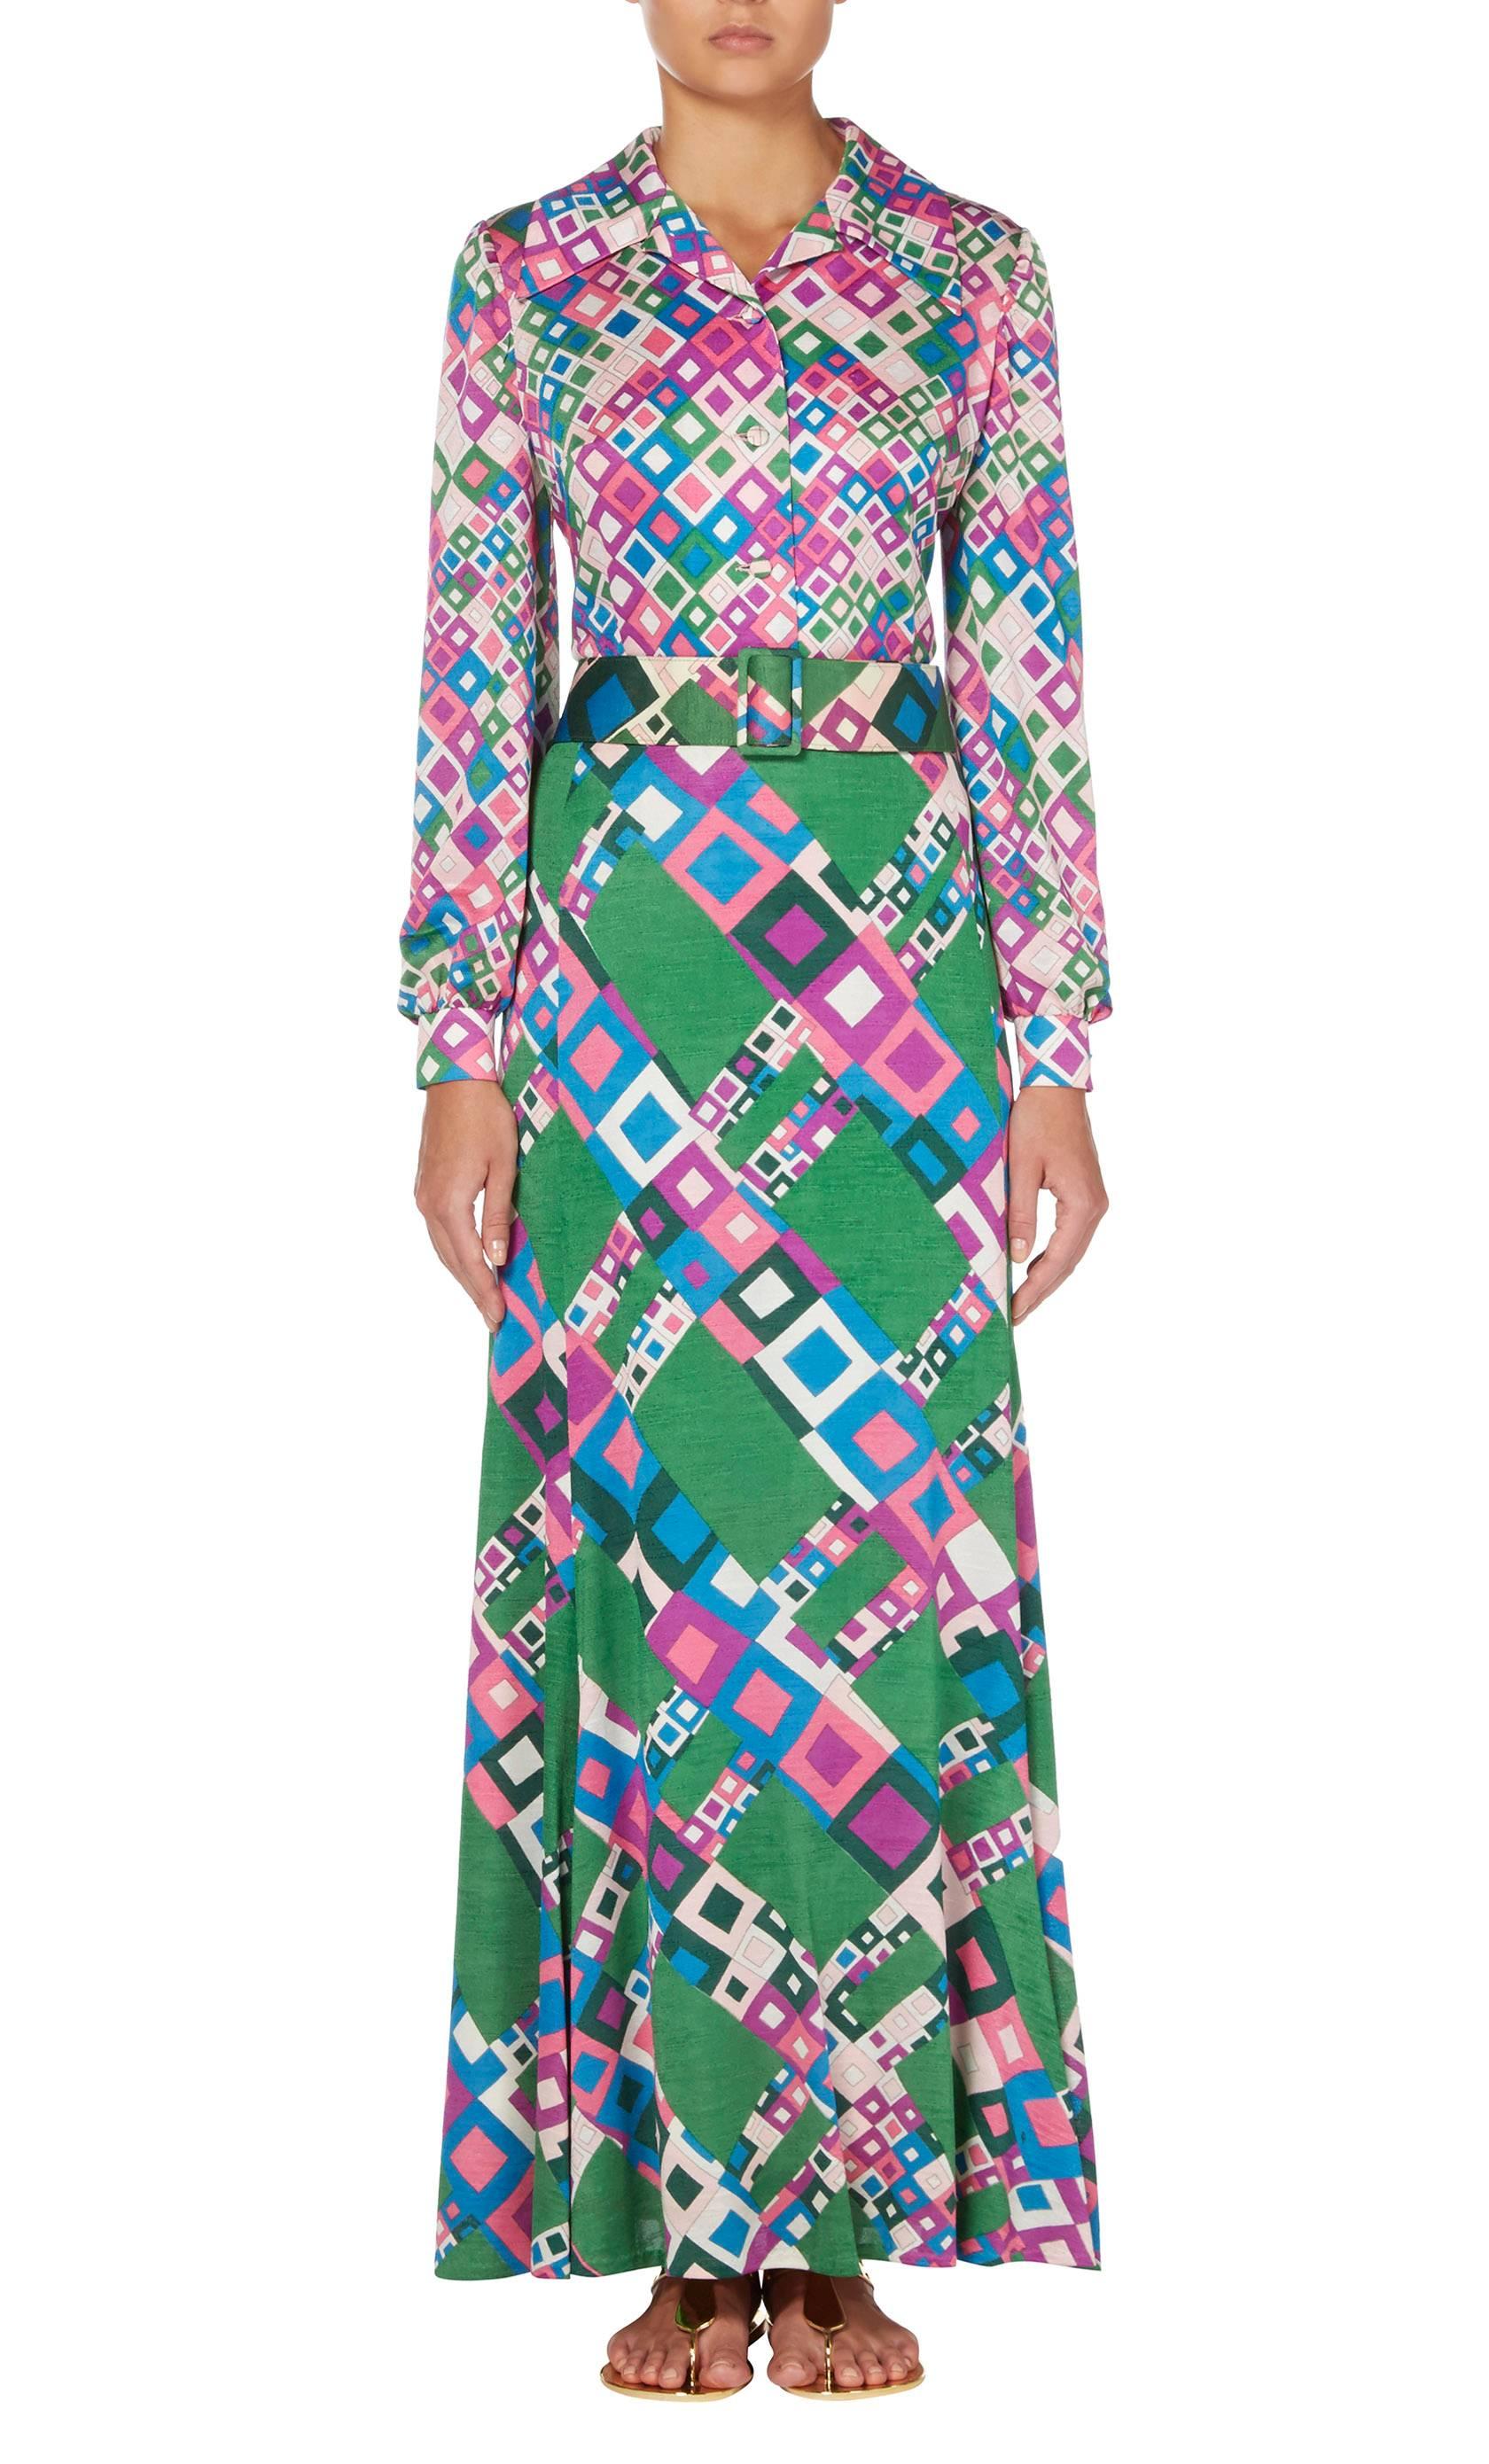 
This bright and colourful Arthème two piece ensemble is a fun way to wear print, and can be worn together or as separates. Made up of a shirt and maxi skirt, both pieces are constructed in raw silk and printed with a green, pink, blue, purple and